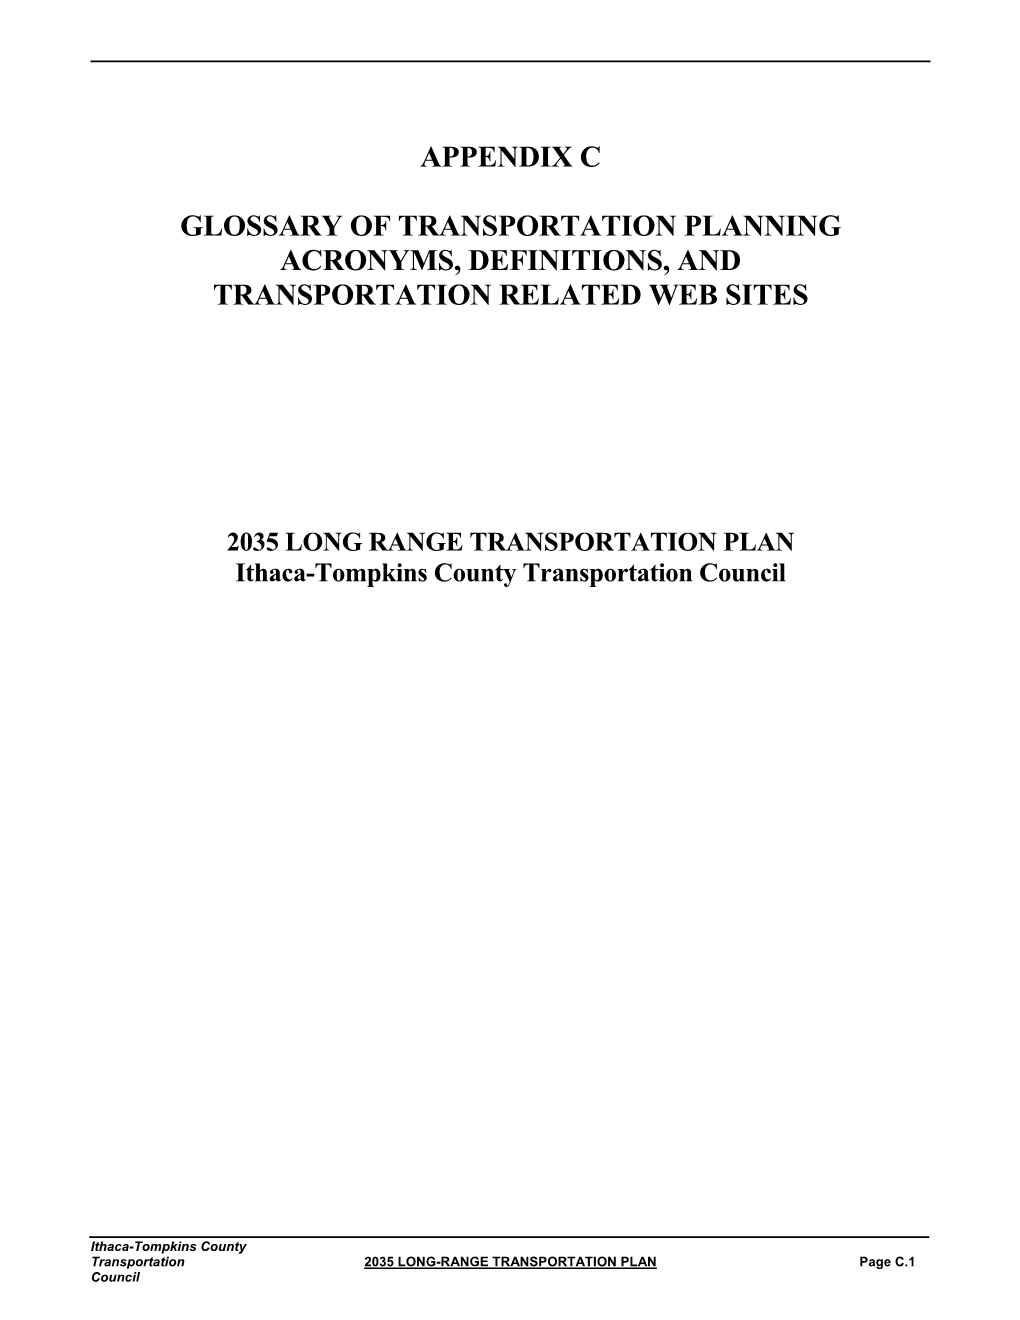 Appendix C Glossary of Transportation Planning Acronyms, Definitions, And